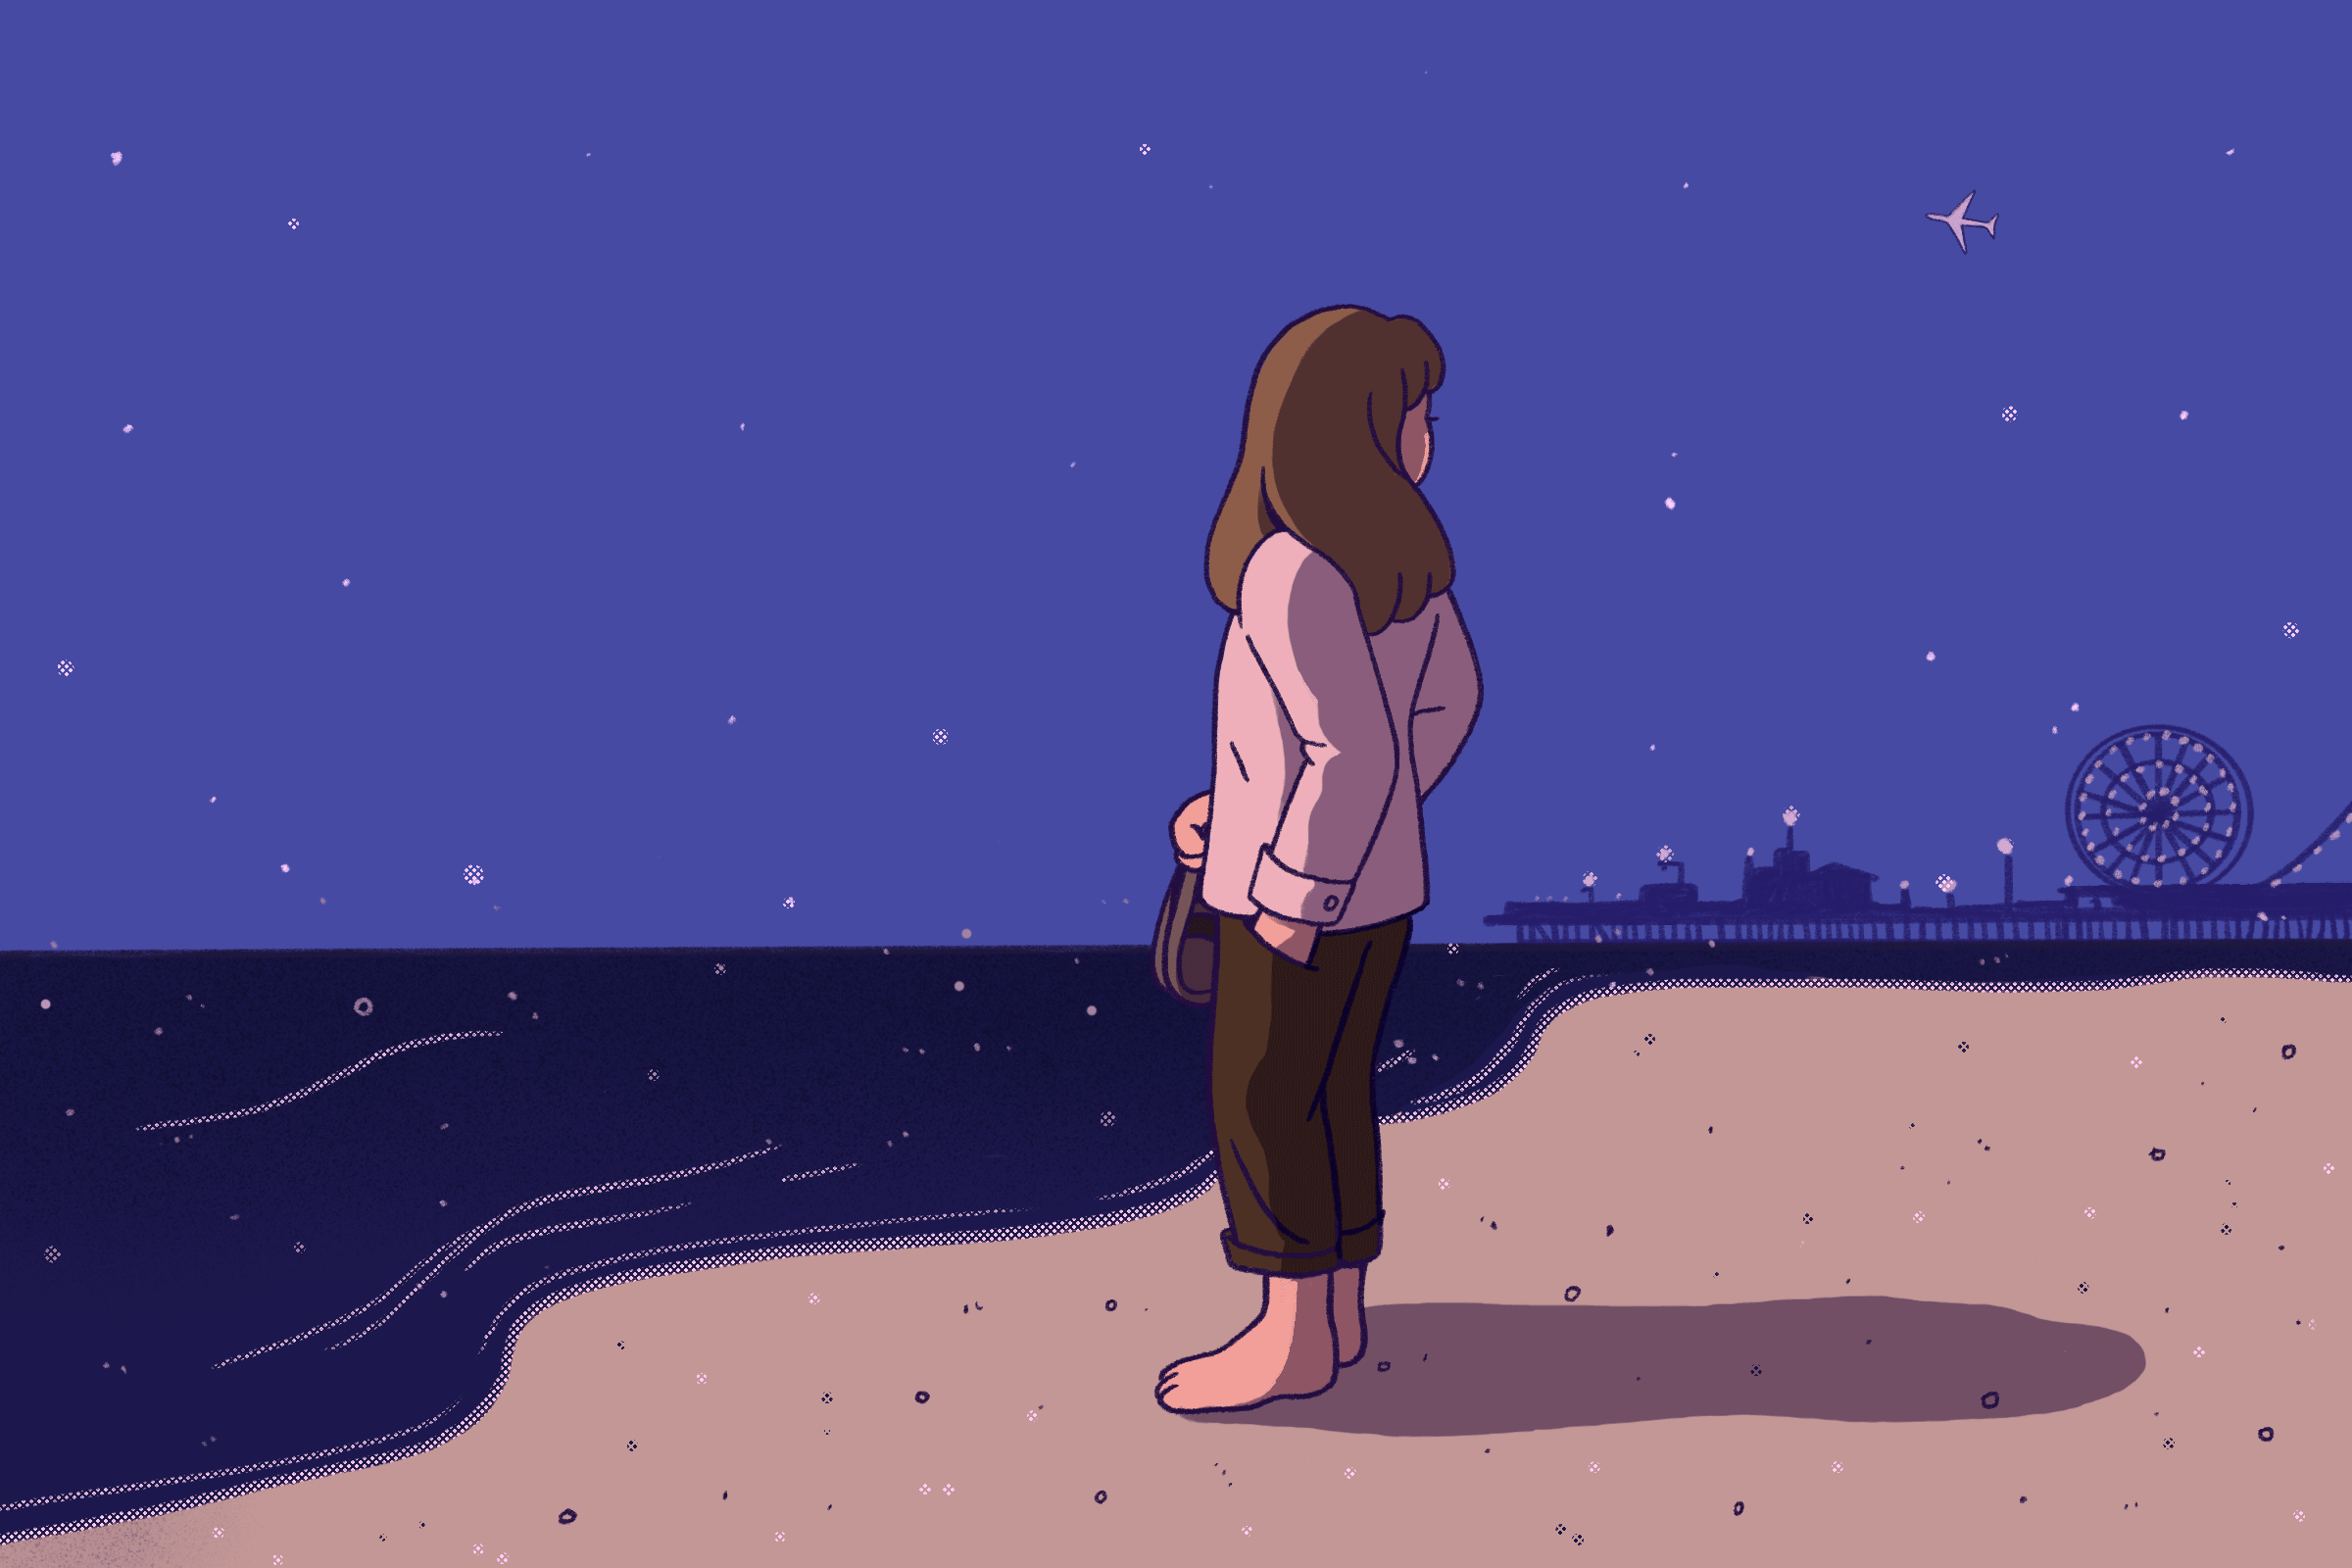 Woman looks away from fireworks on the beach and toward a departing airplane.